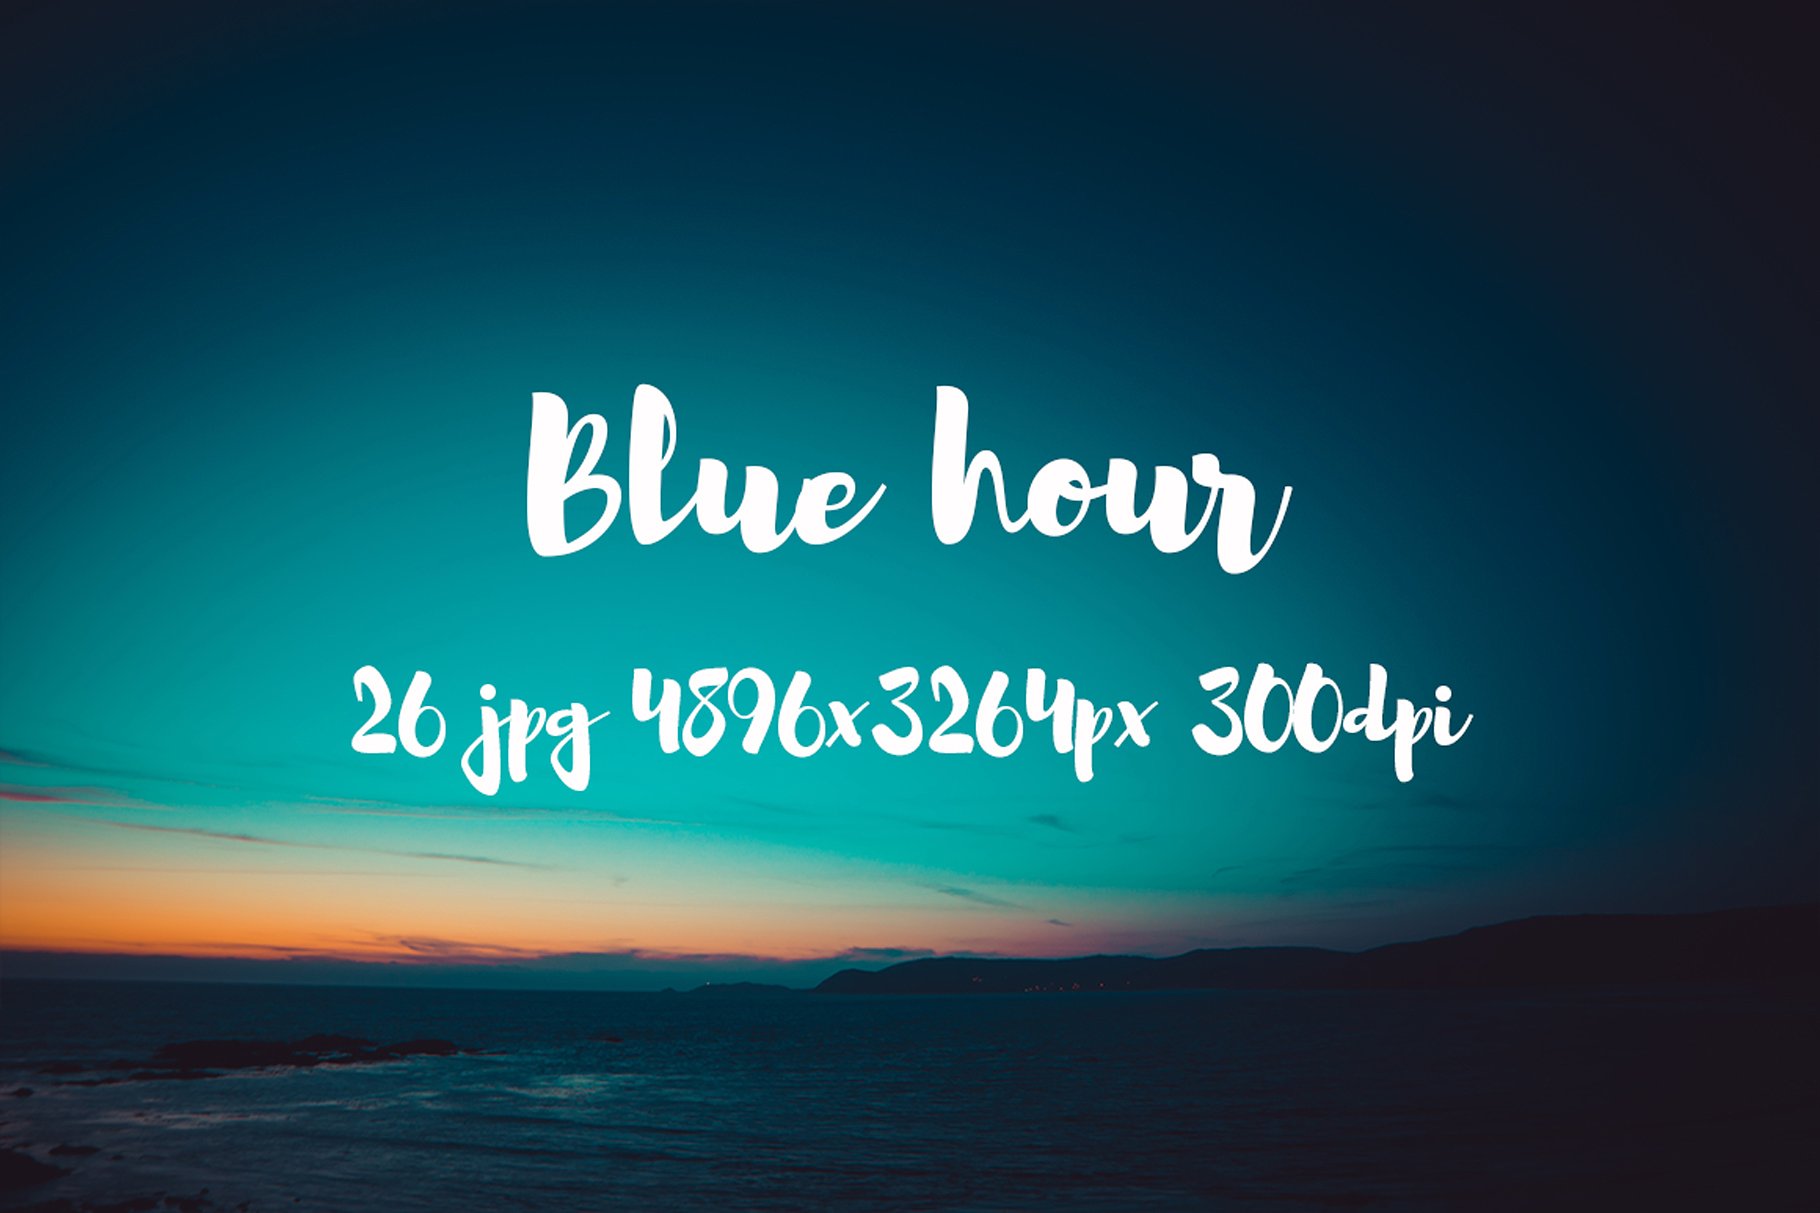 Blue hour pack photo pack